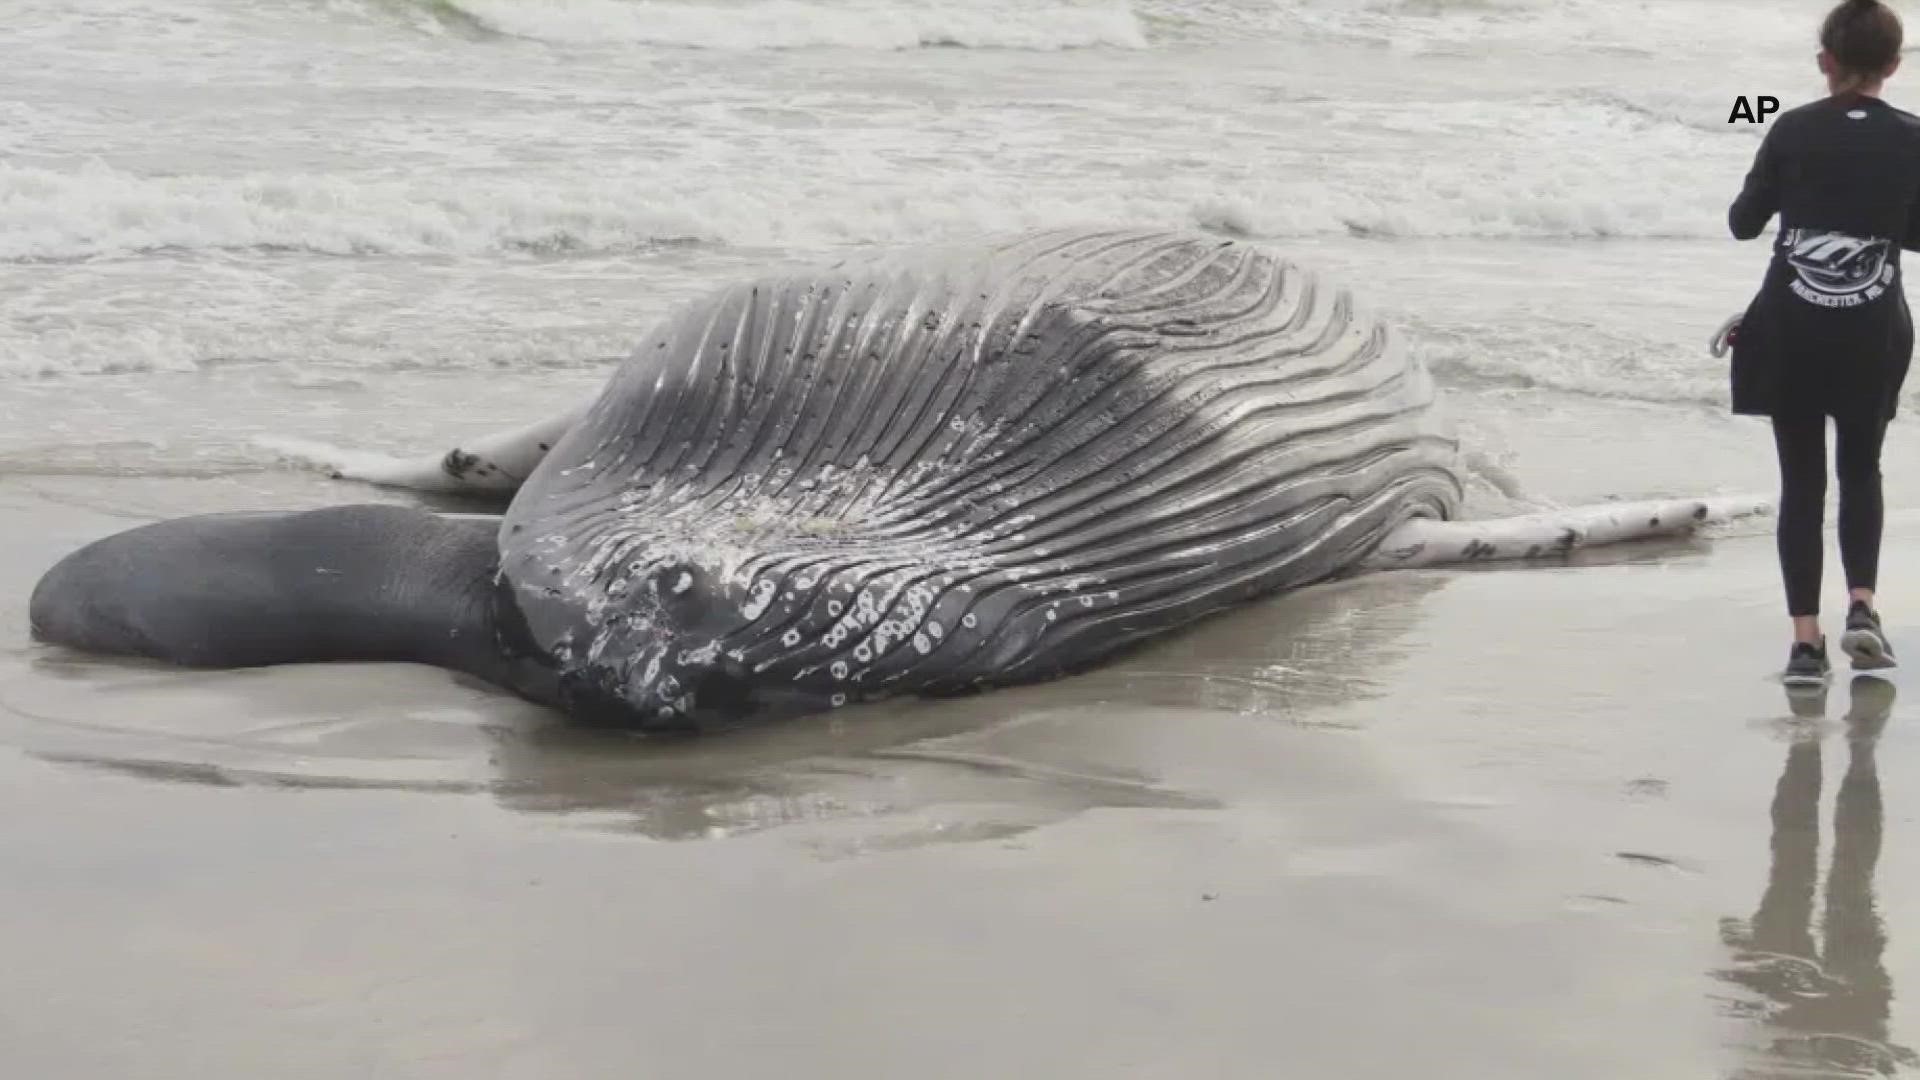 Seven dead whales have washed ashore in New York and New Jersey in a little over a month, leading lawmakers to grow wary of wind farm development.